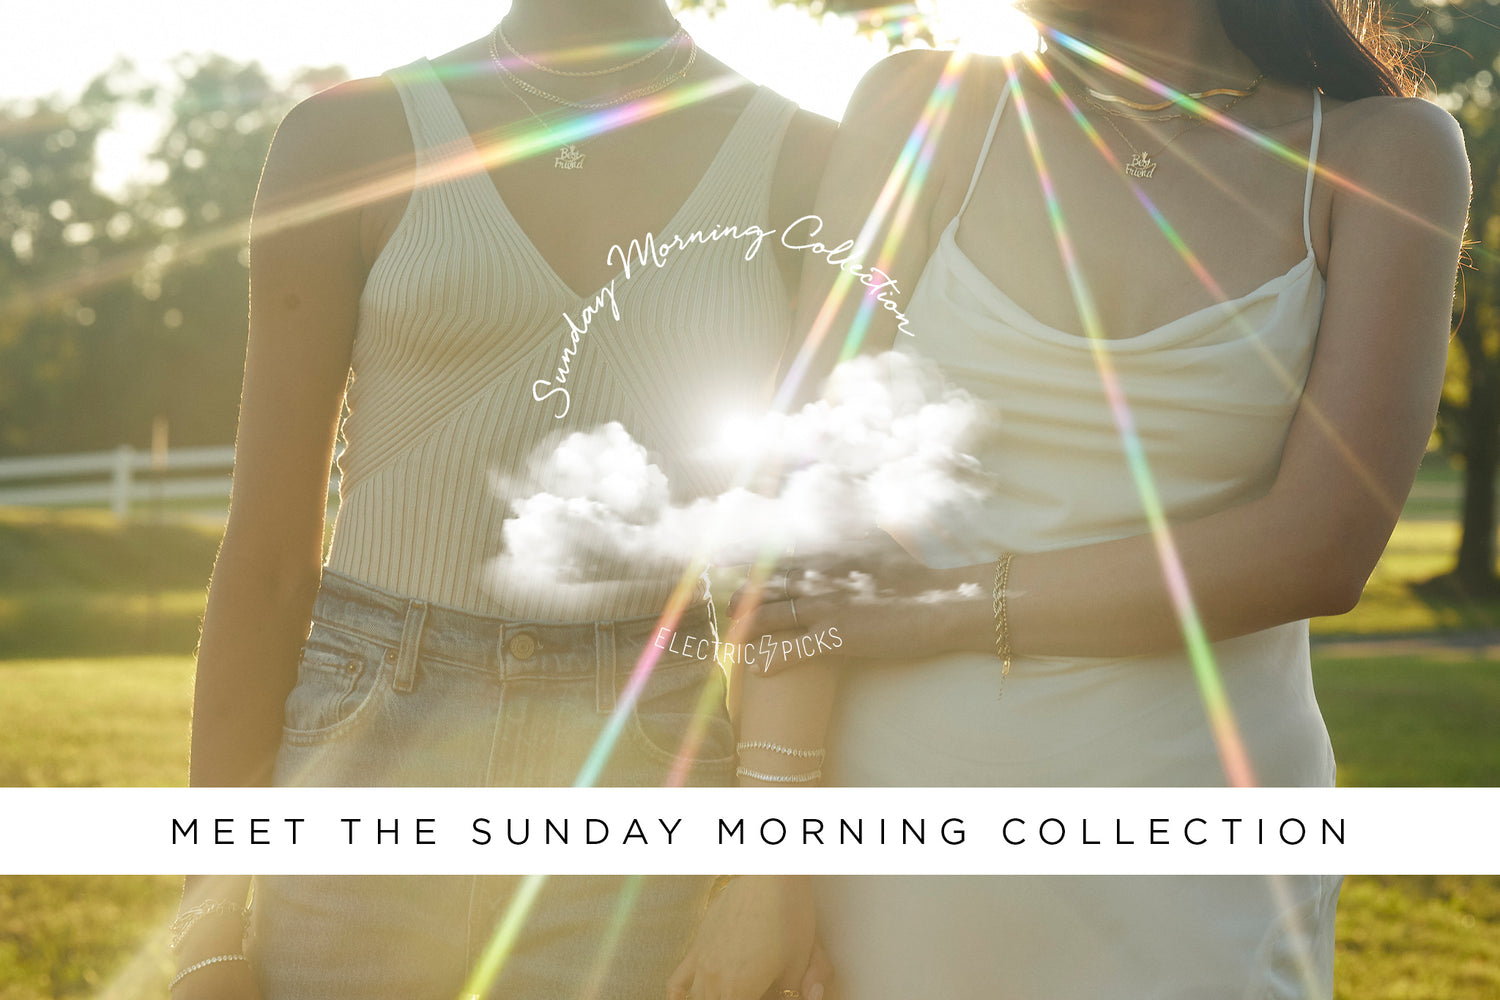 Meet the Sunday Morning Collection